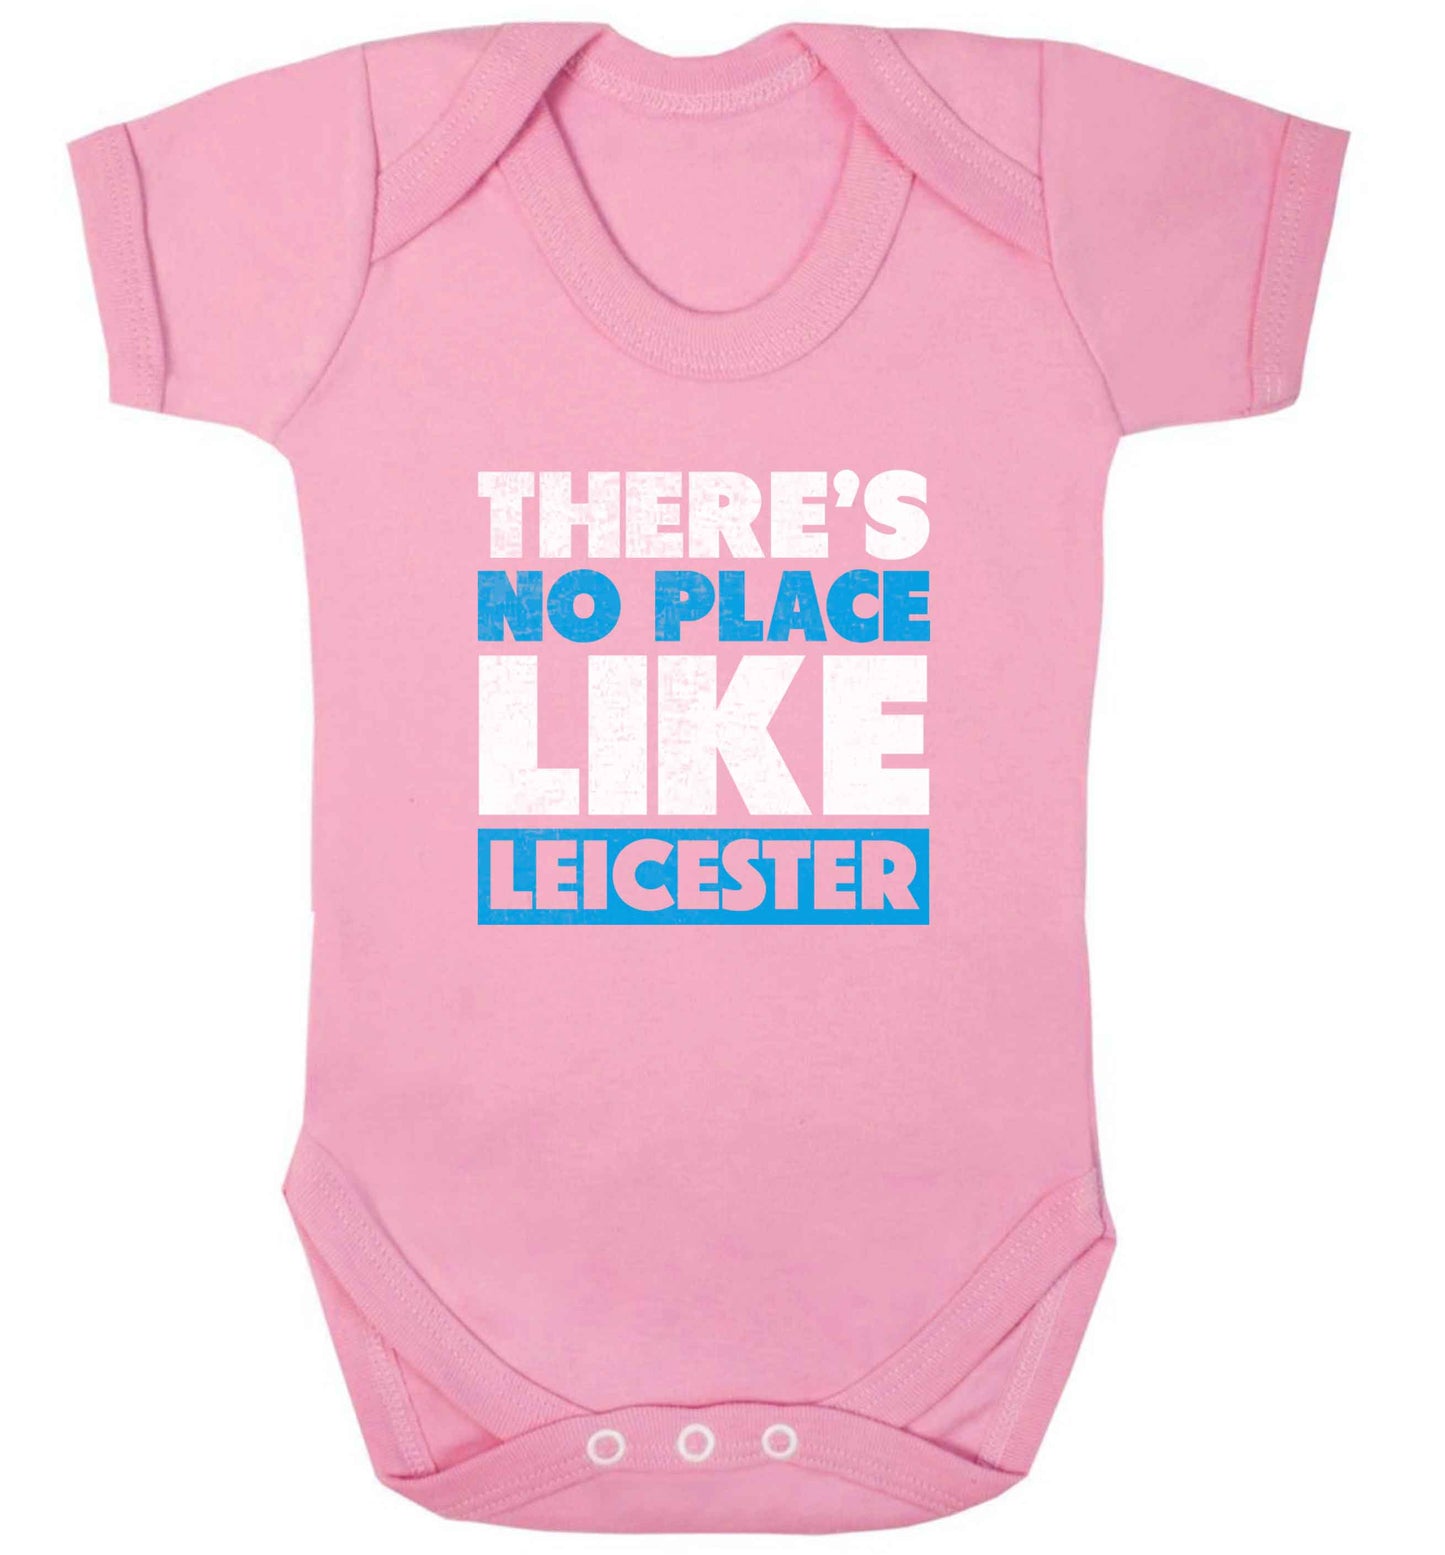 There's no place like Leicester baby vest pale pink 18-24 months